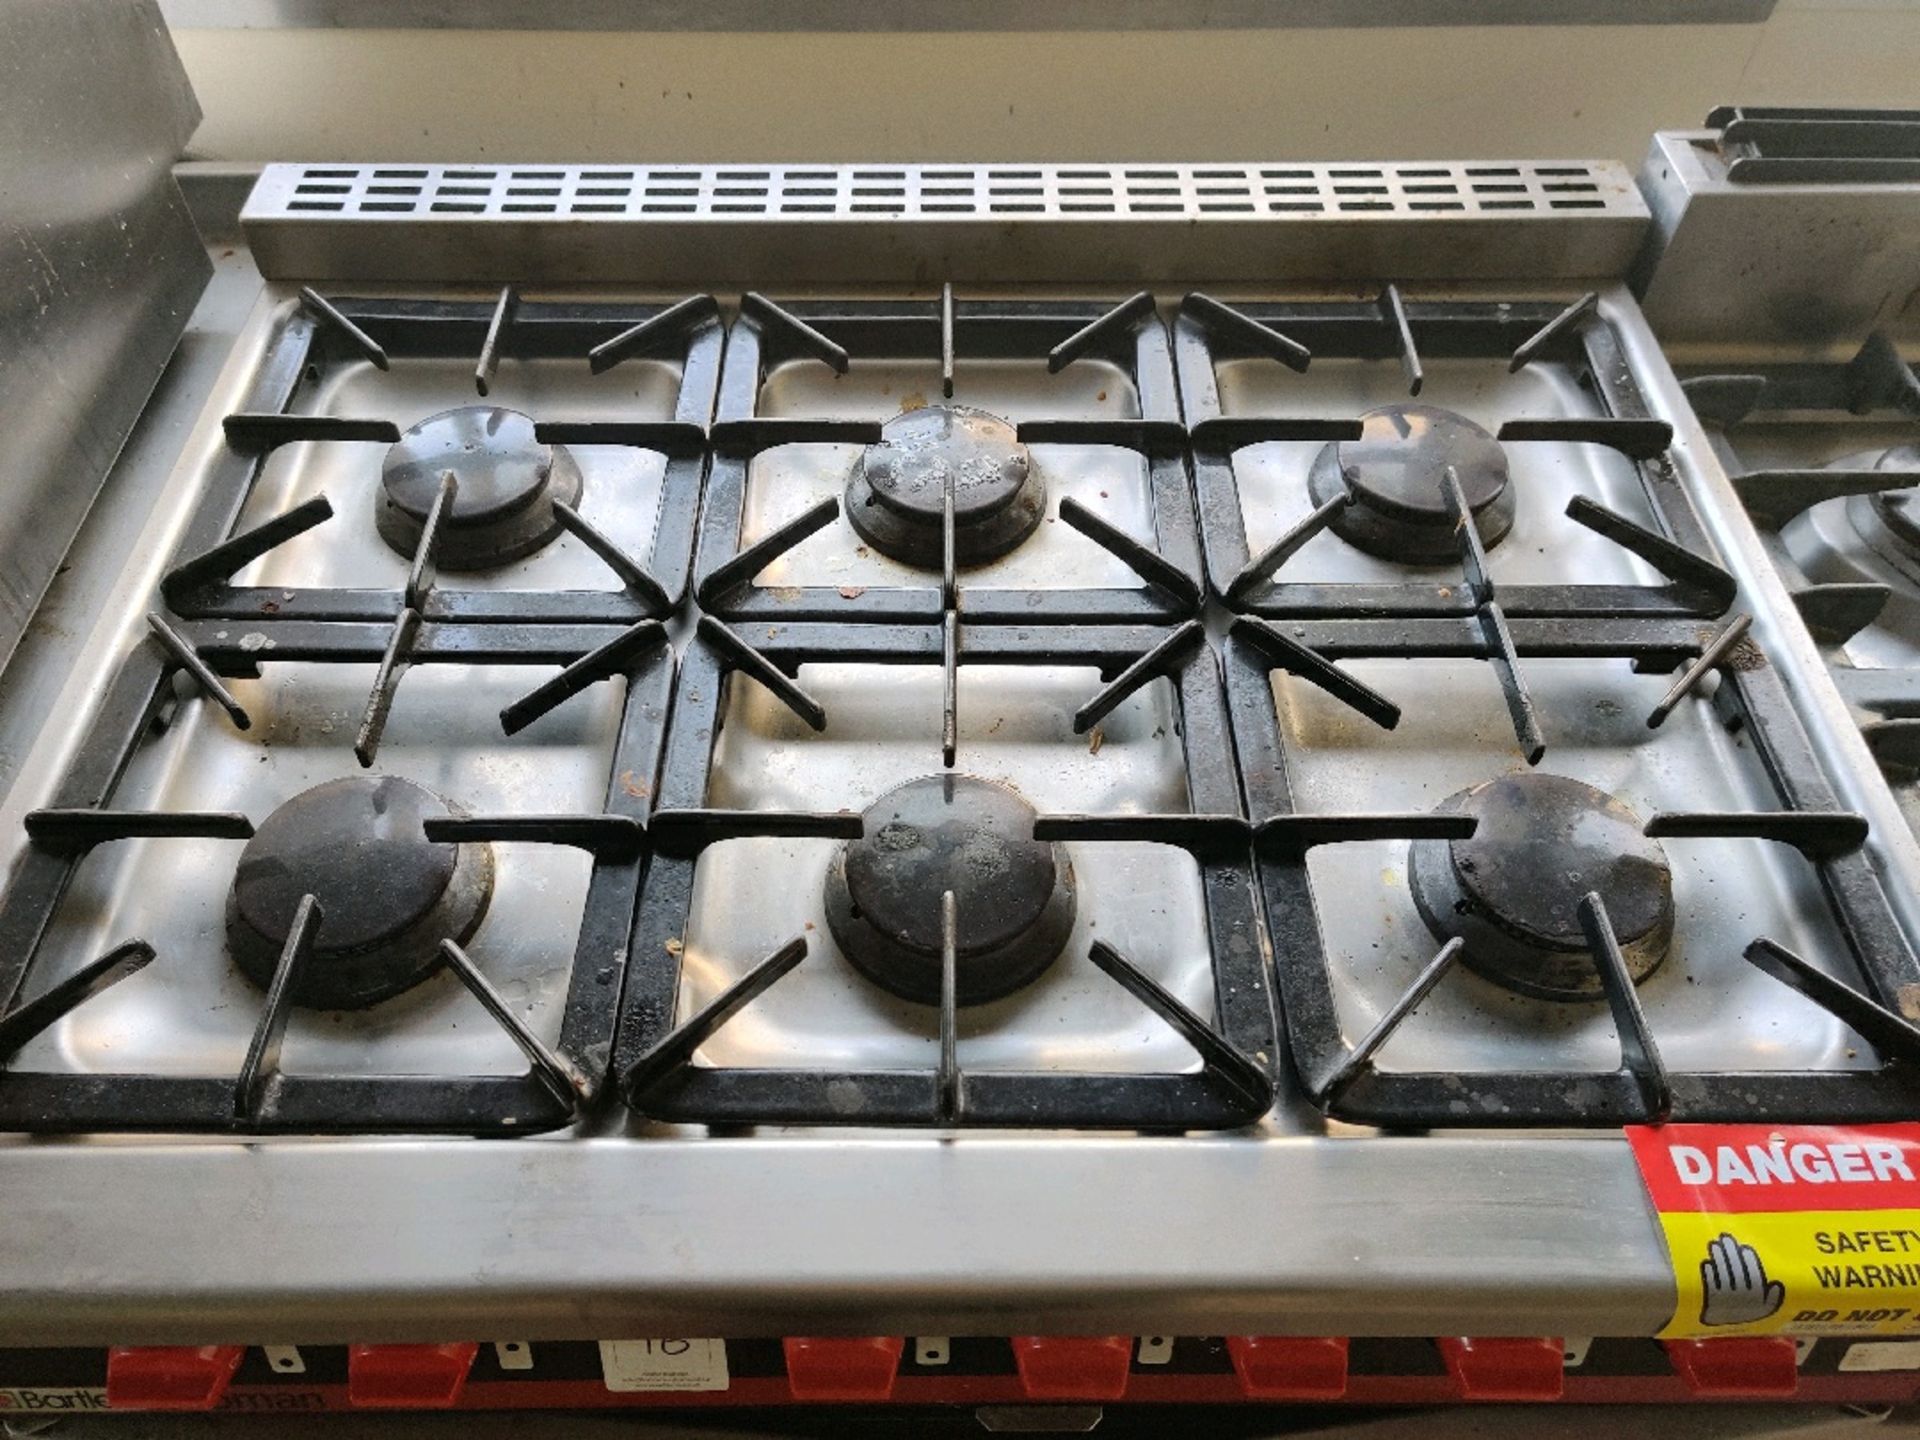 Bartlett yeoman 6 gas hob and oven - Image 2 of 5